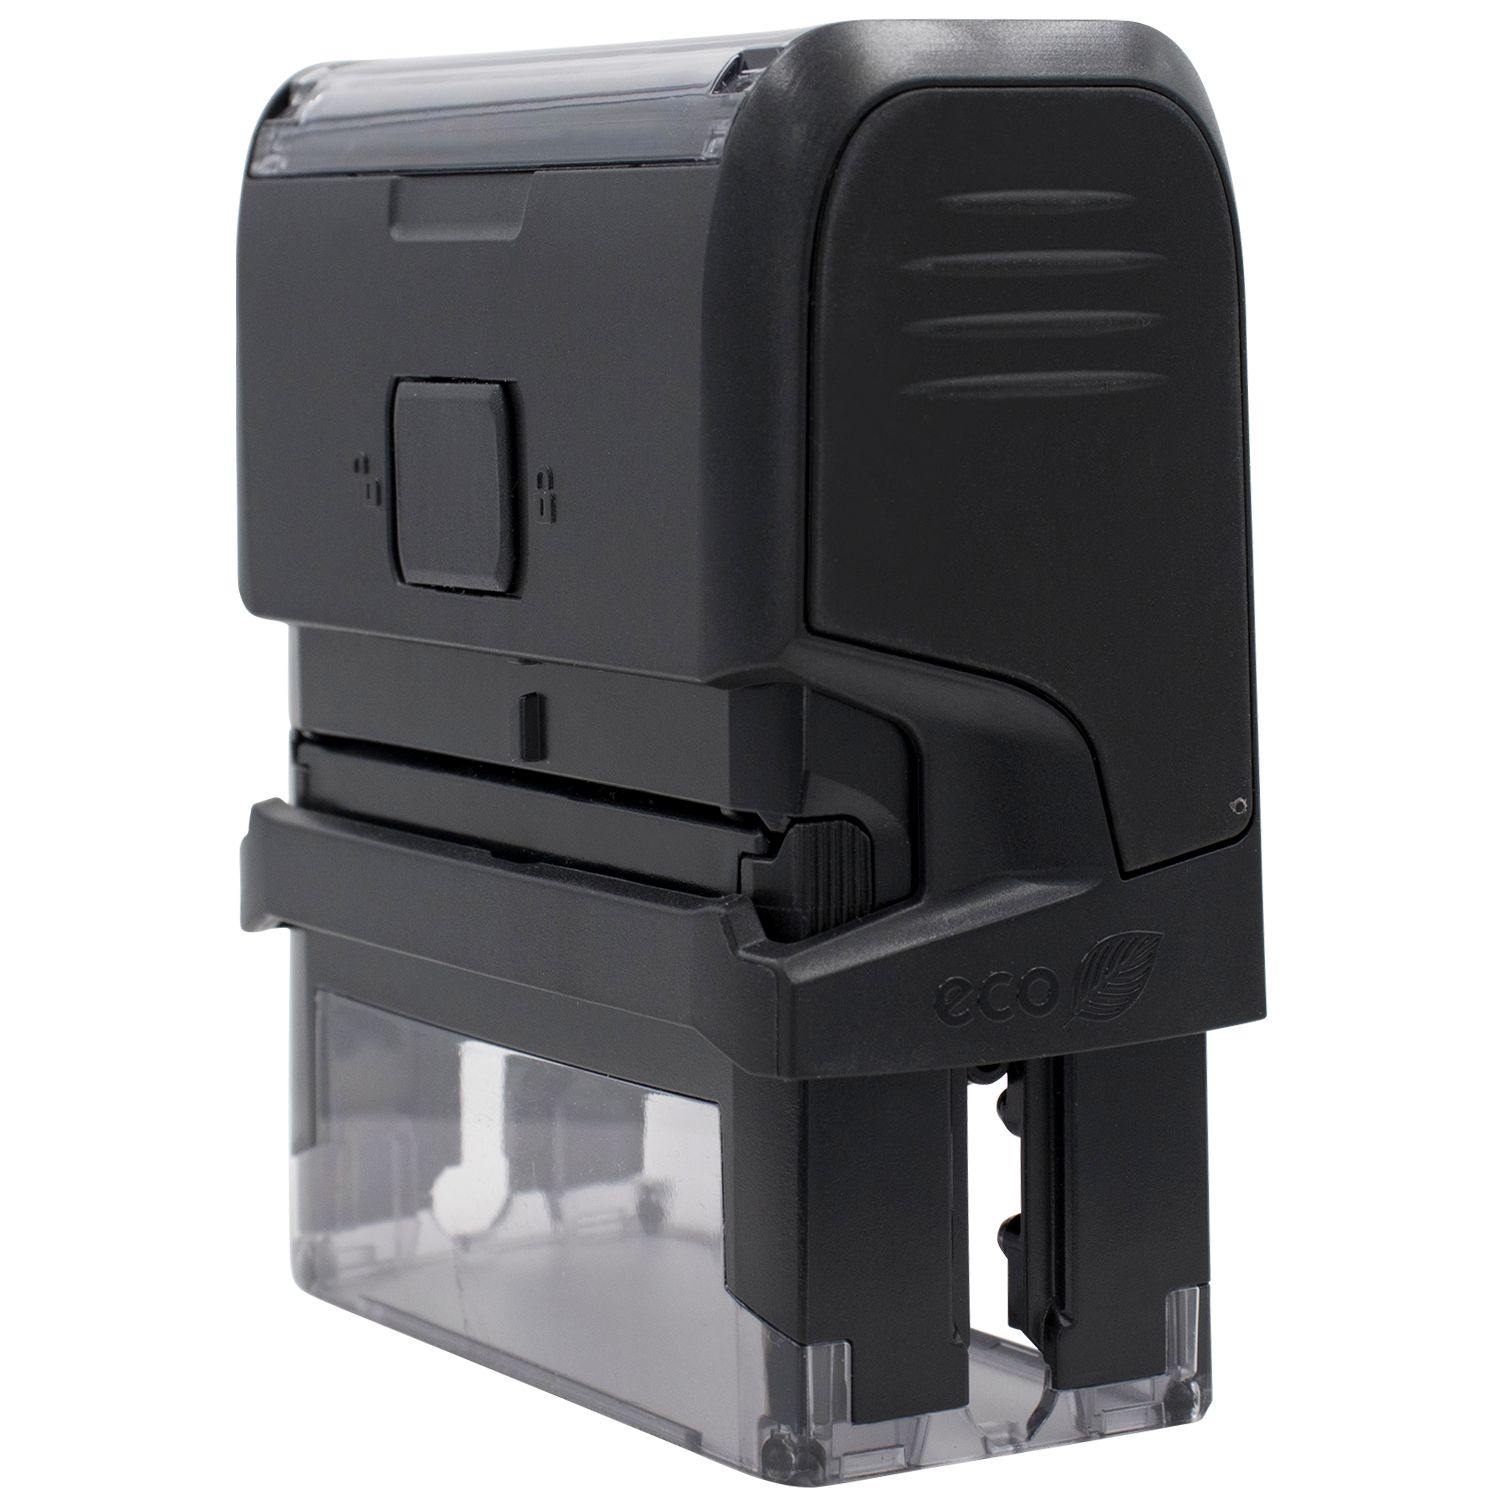 Side View of Large Self Inking Community Property Stamp at an Angle